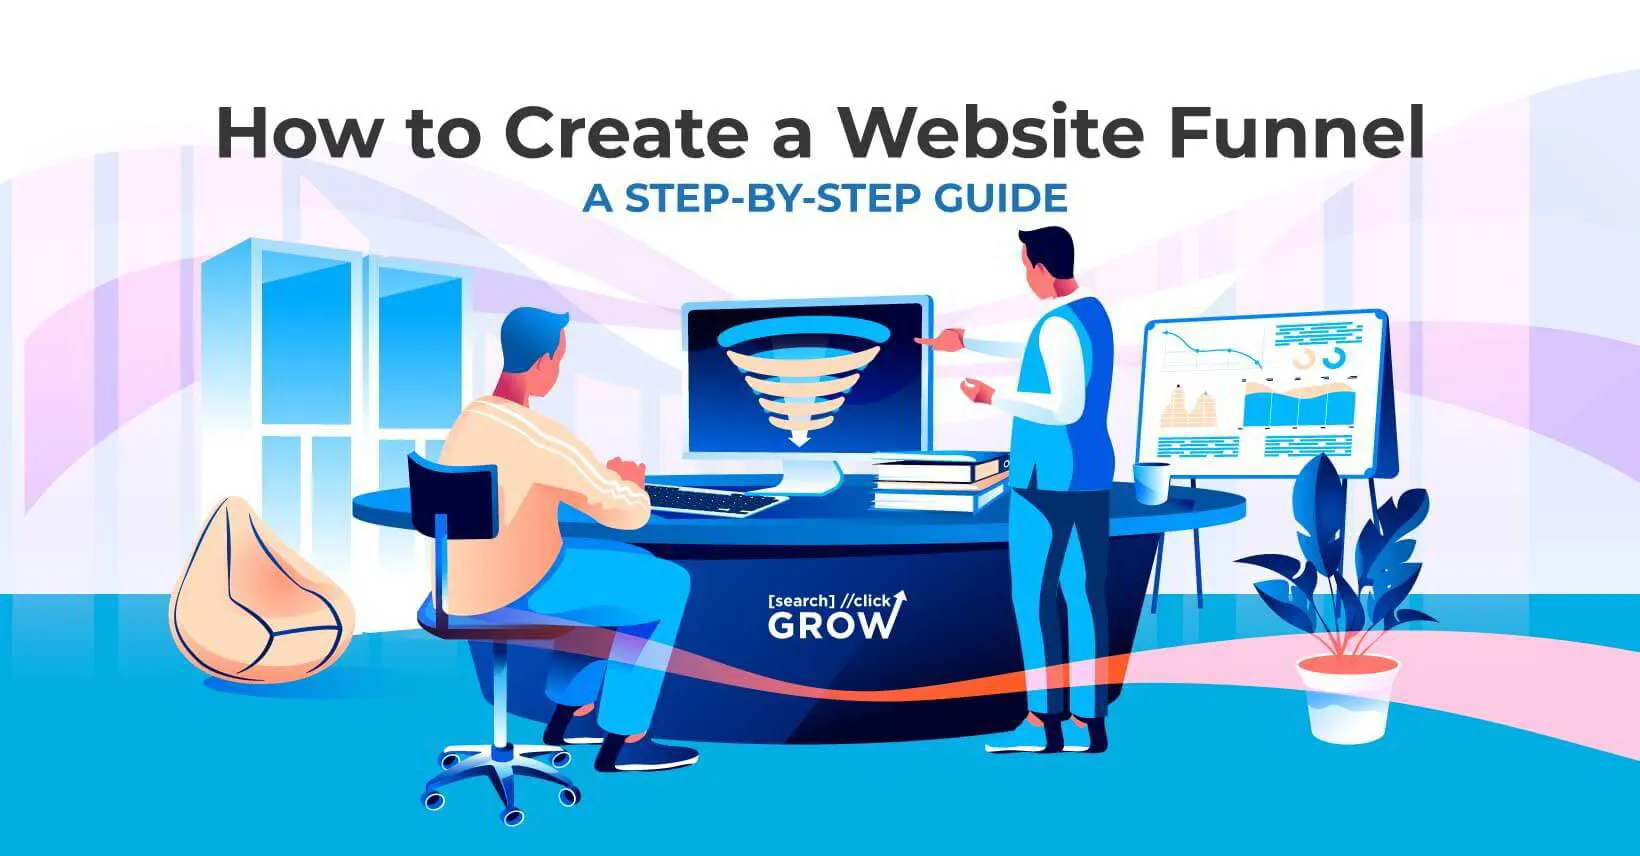 How to Create a Website Funnel in 5 Easy Steps